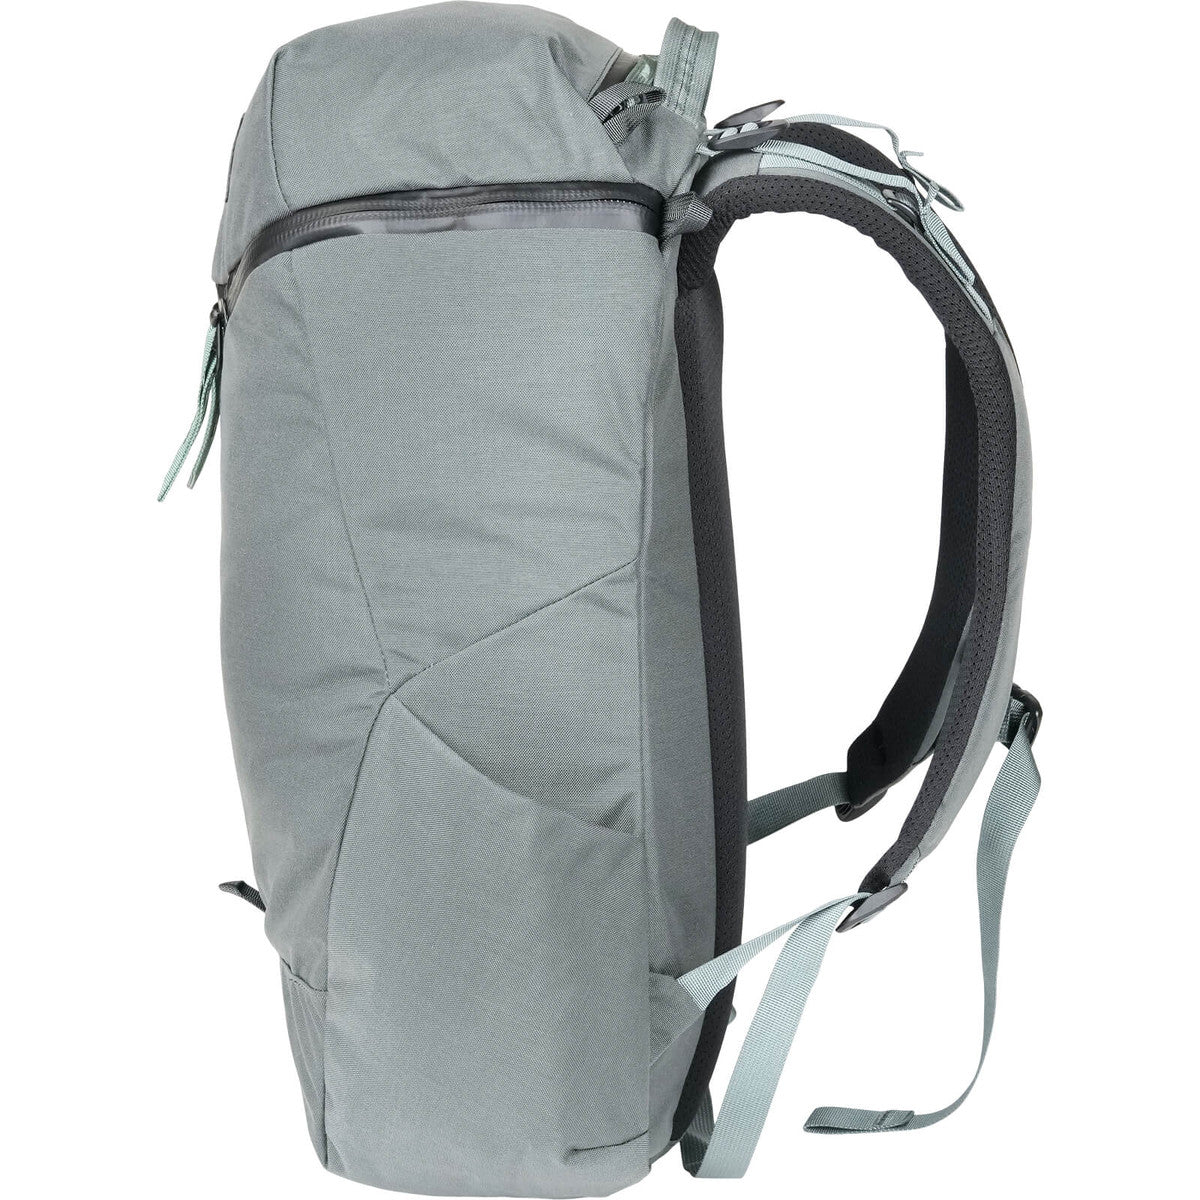 MYSTERY RANCH CATALYST BACKPACK - 22L